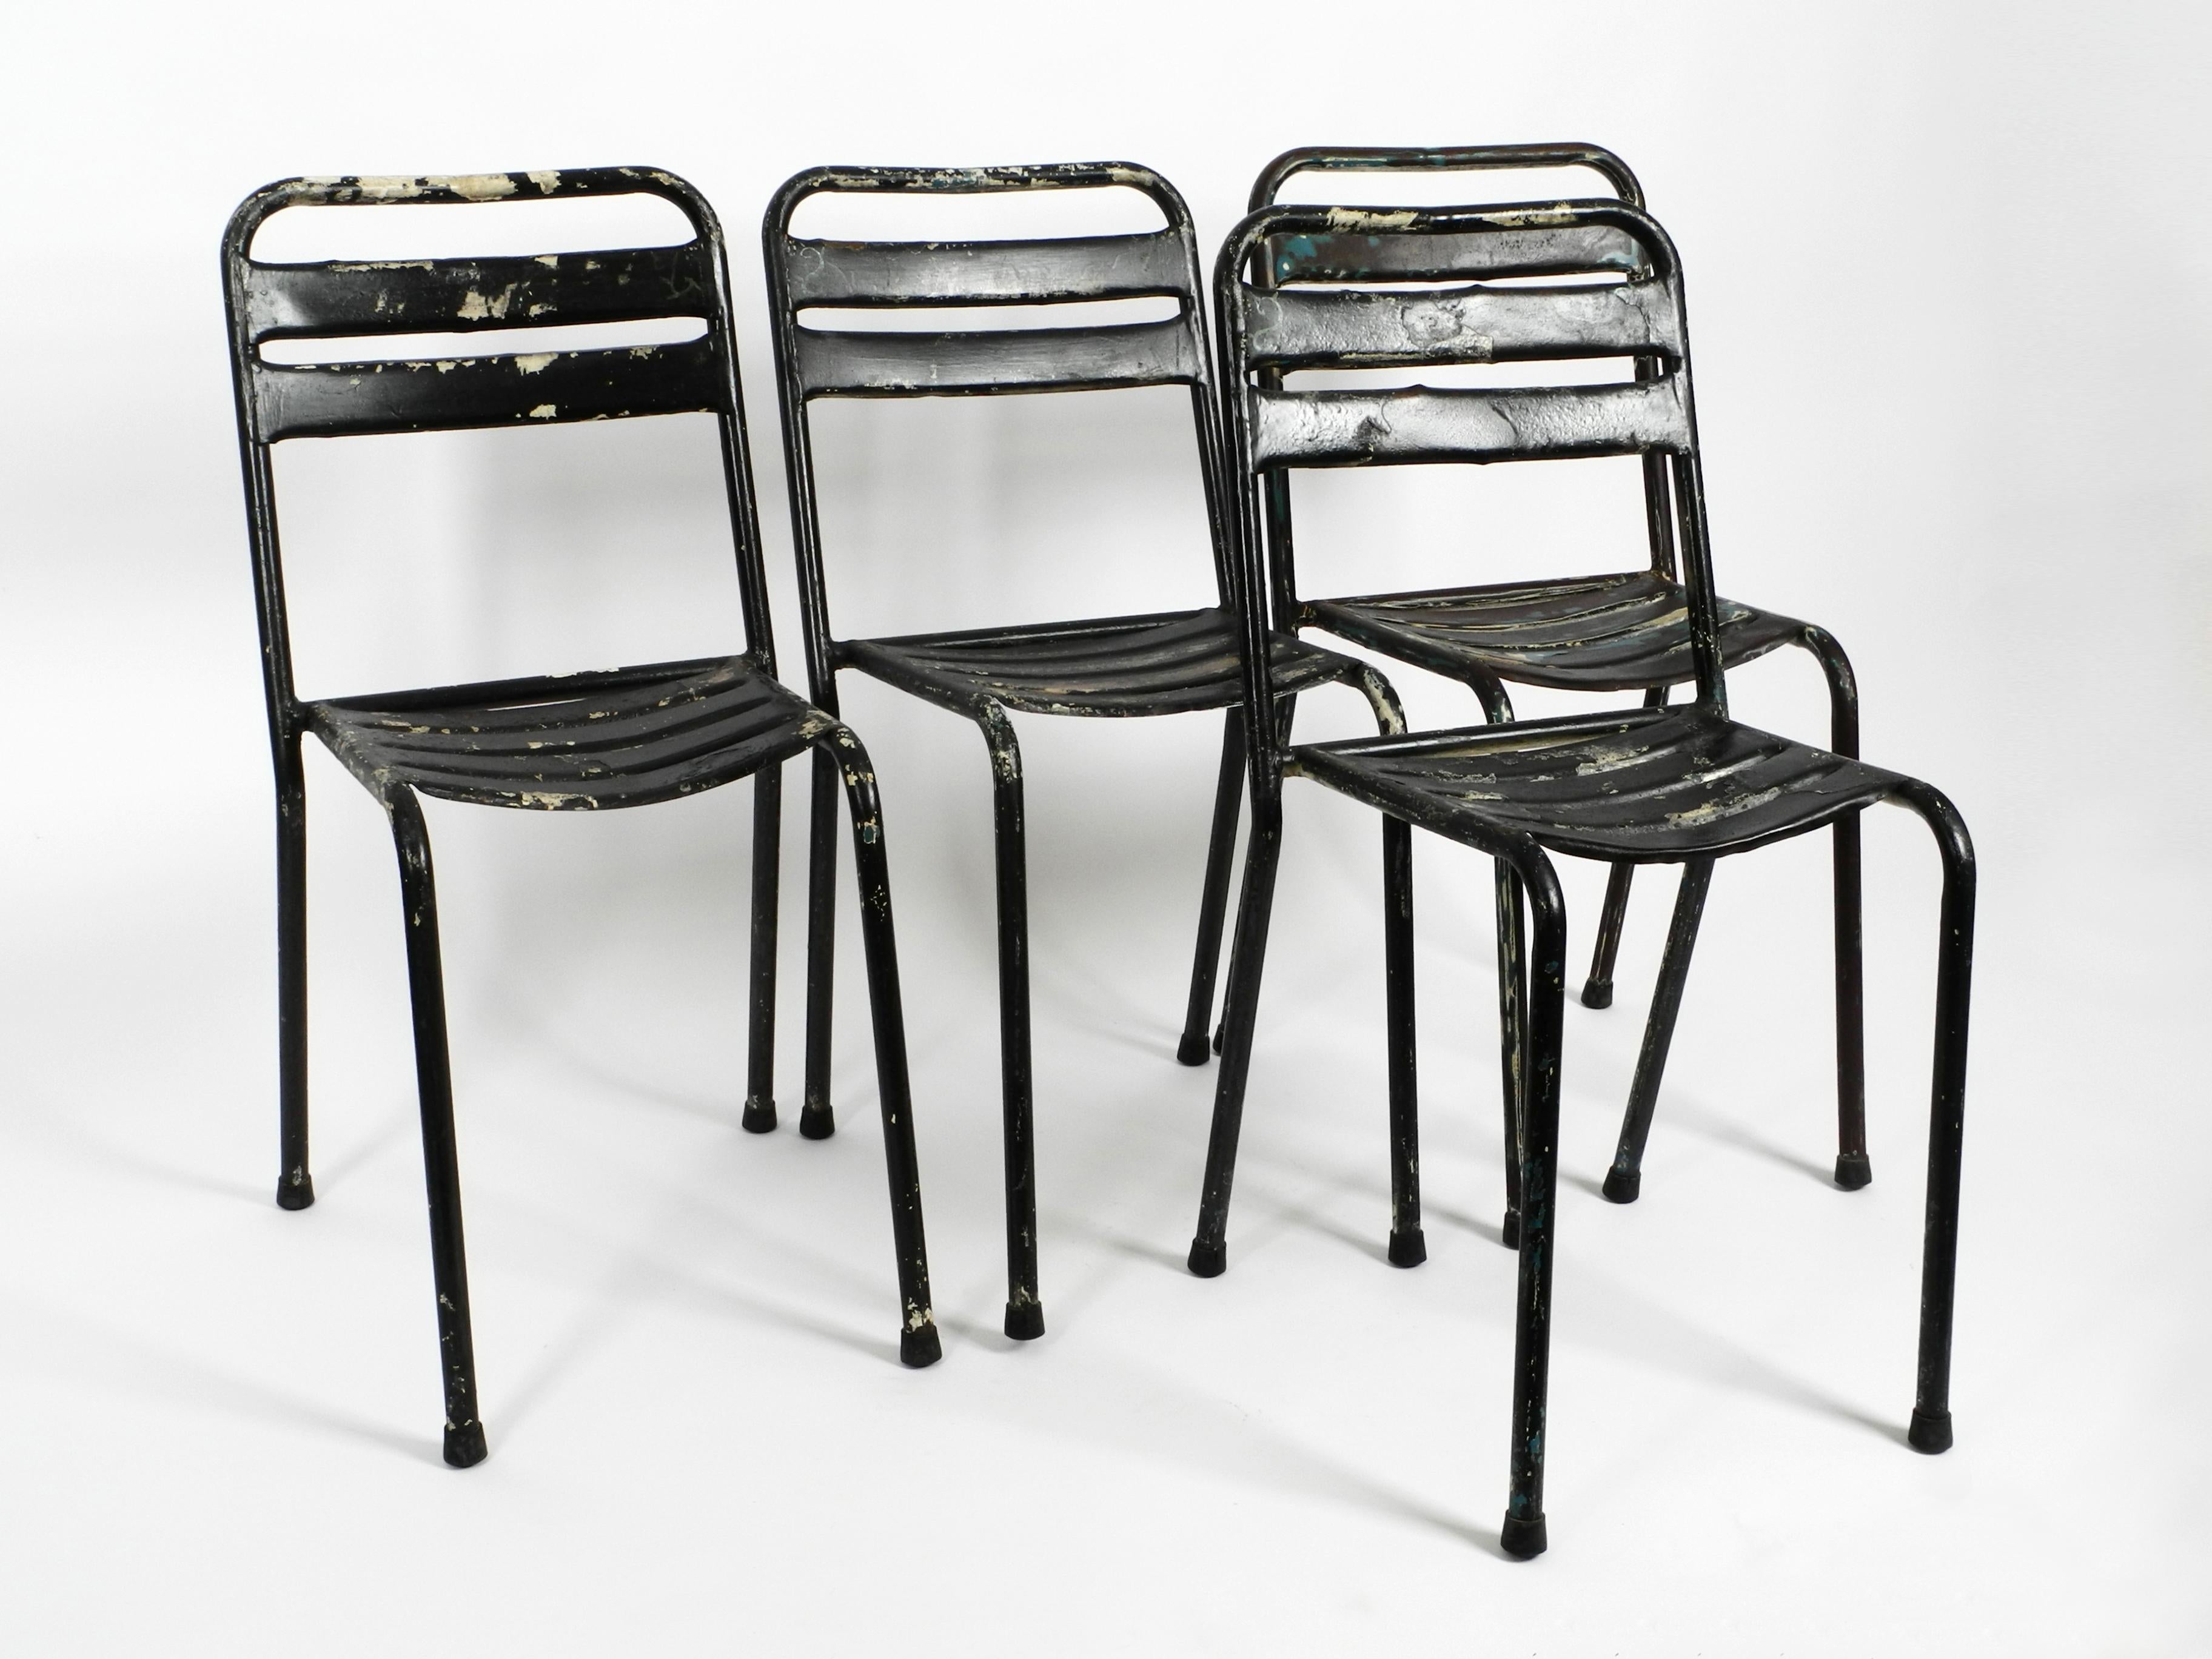 Four original French sanded 1950s Tolix Bistro cafe stackable chairs.
Design Classics by Xavier Pauchard. Made in France.
Minimalistic, very robust industrial design. Chairs are made entirely of metal and are very light.
Very good vintage